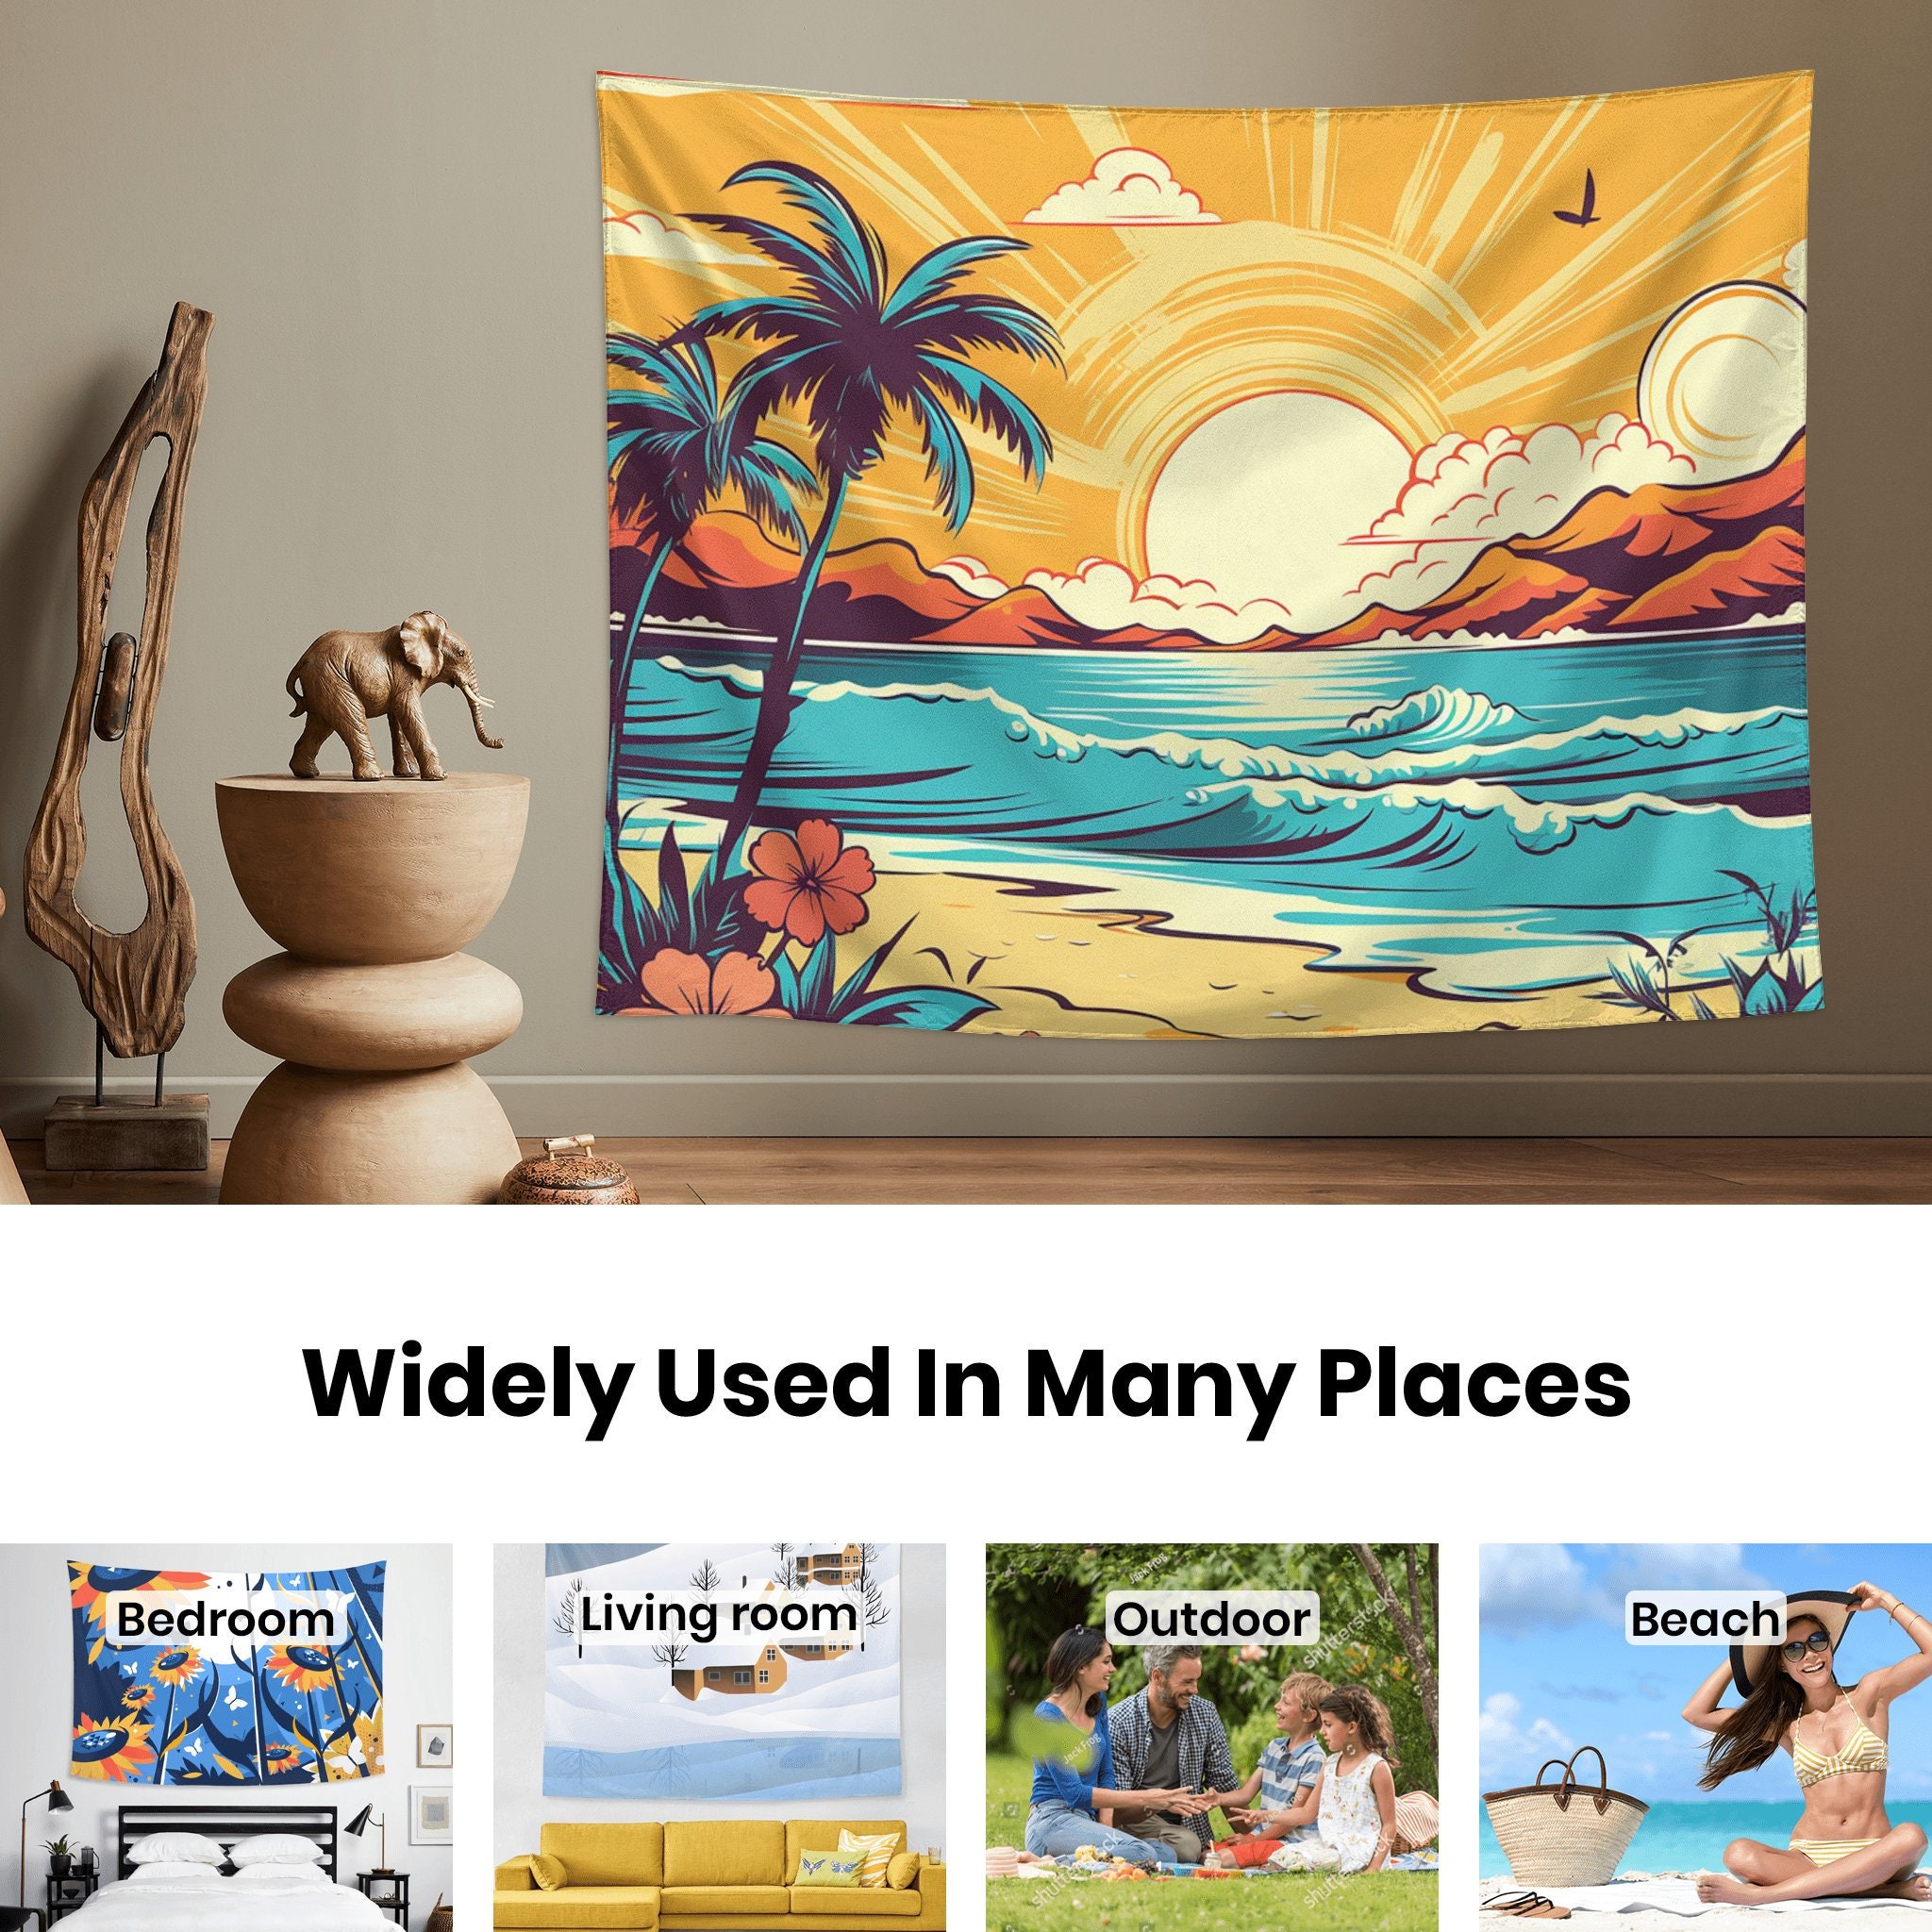 Ocean Beach Tapestry Summer Tropical Beach Tapestry Tropical Island Palm Tree Nature